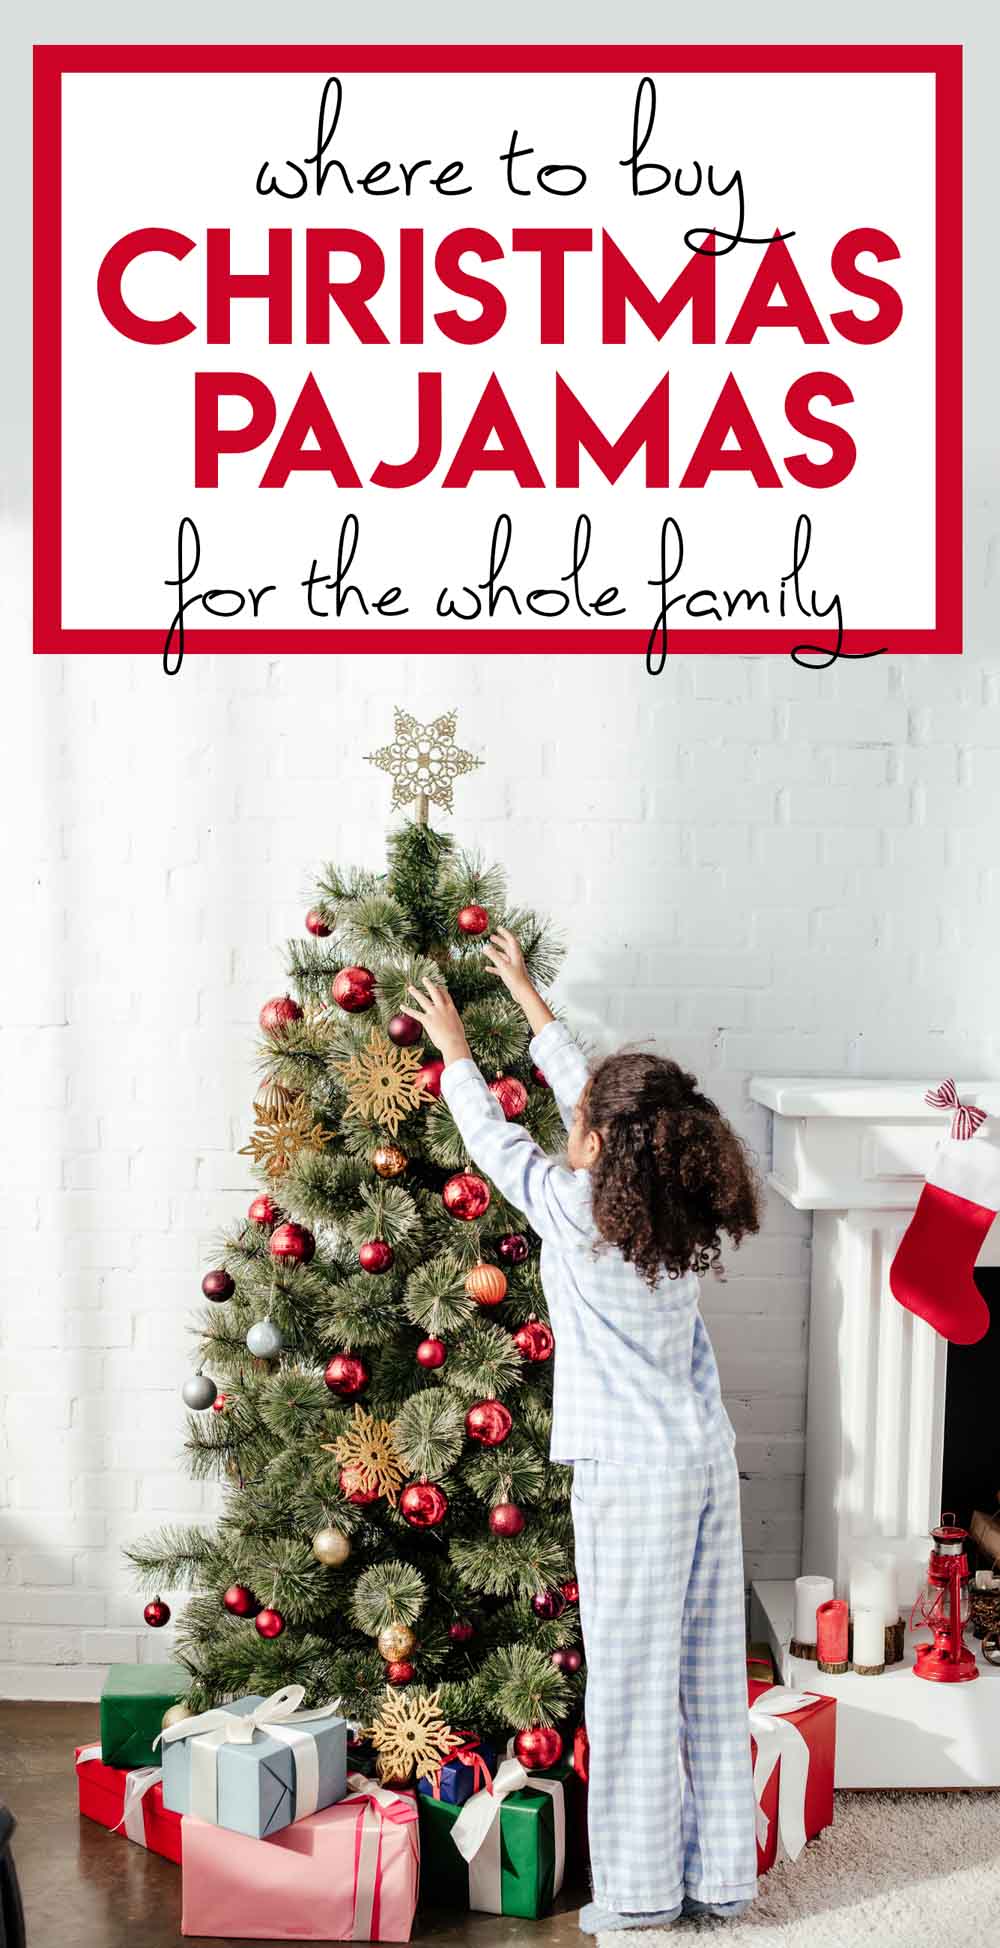 The best places to buy matching family pajamas for Christmas. A fun holiday tradition! via @lara_neves